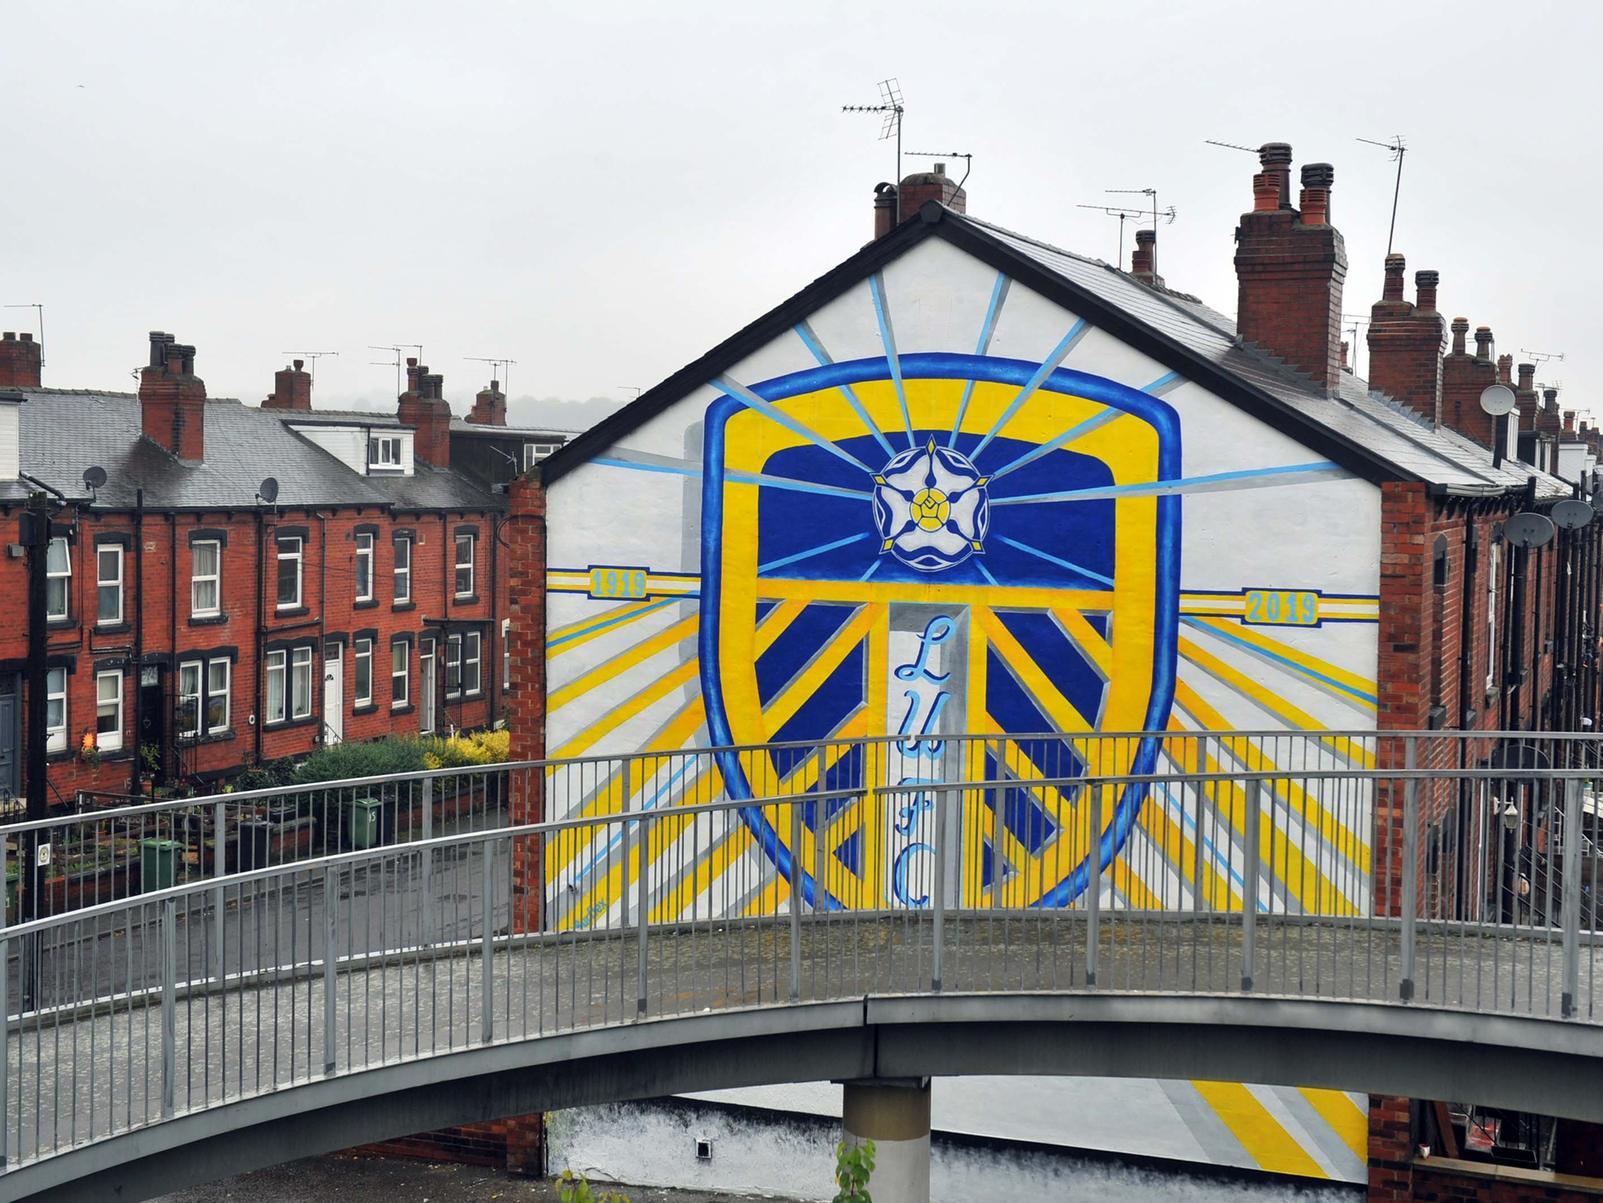 The artwork was painted on the side of a property just a few hundred metres from Elland Road.